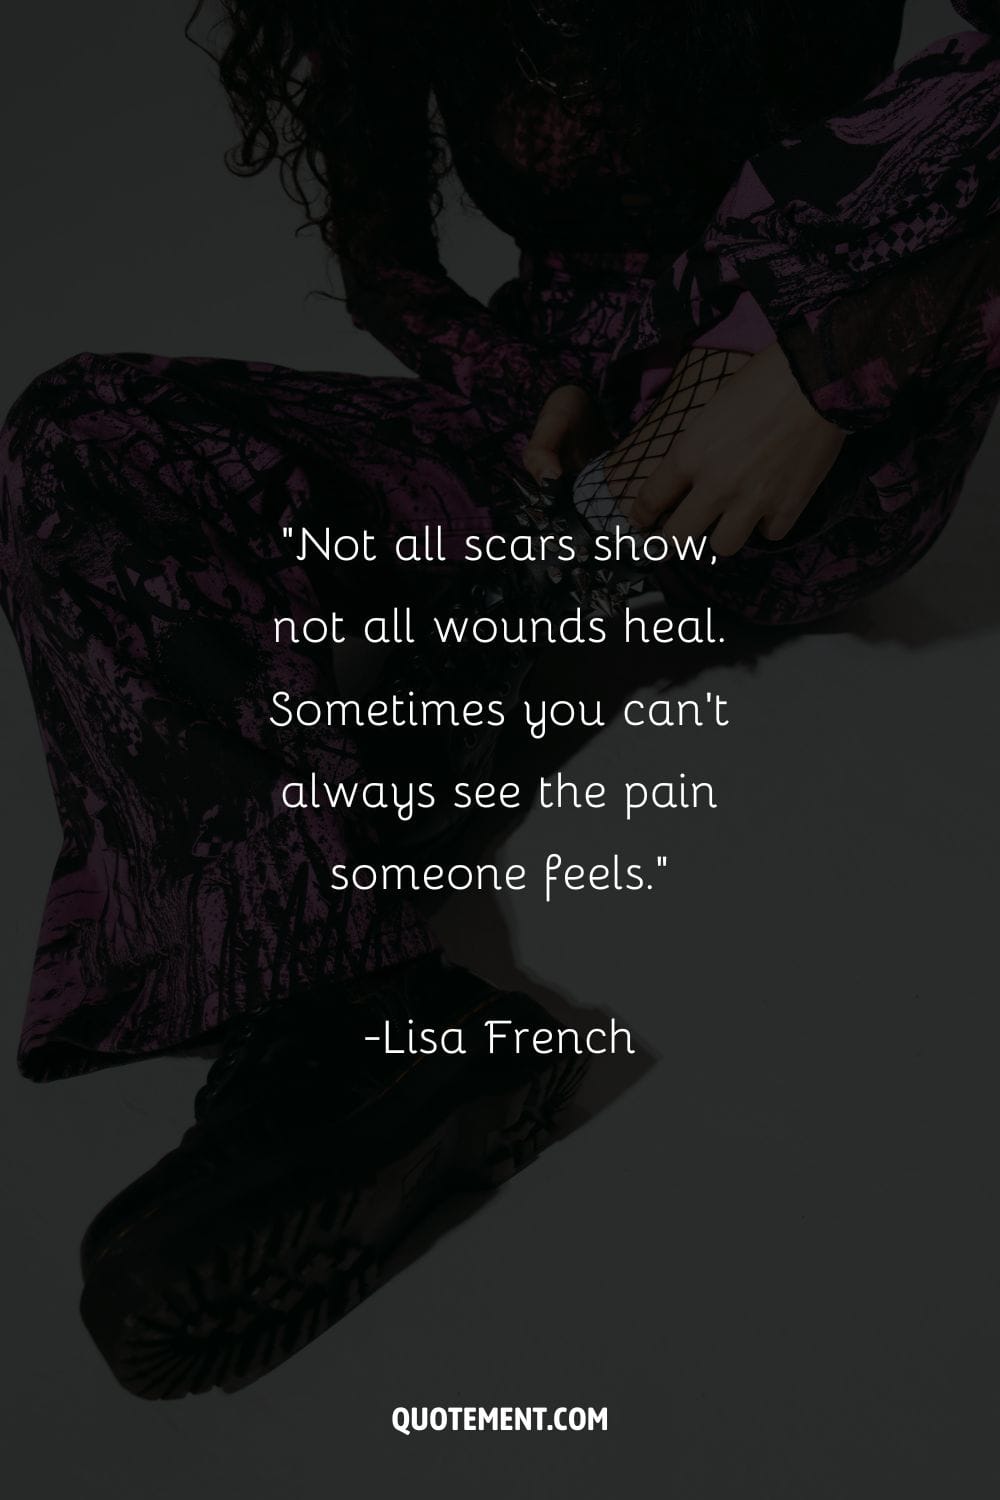 Not all scars show, not all wounds heal. Sometimes you can’t always see the pain someone feels.